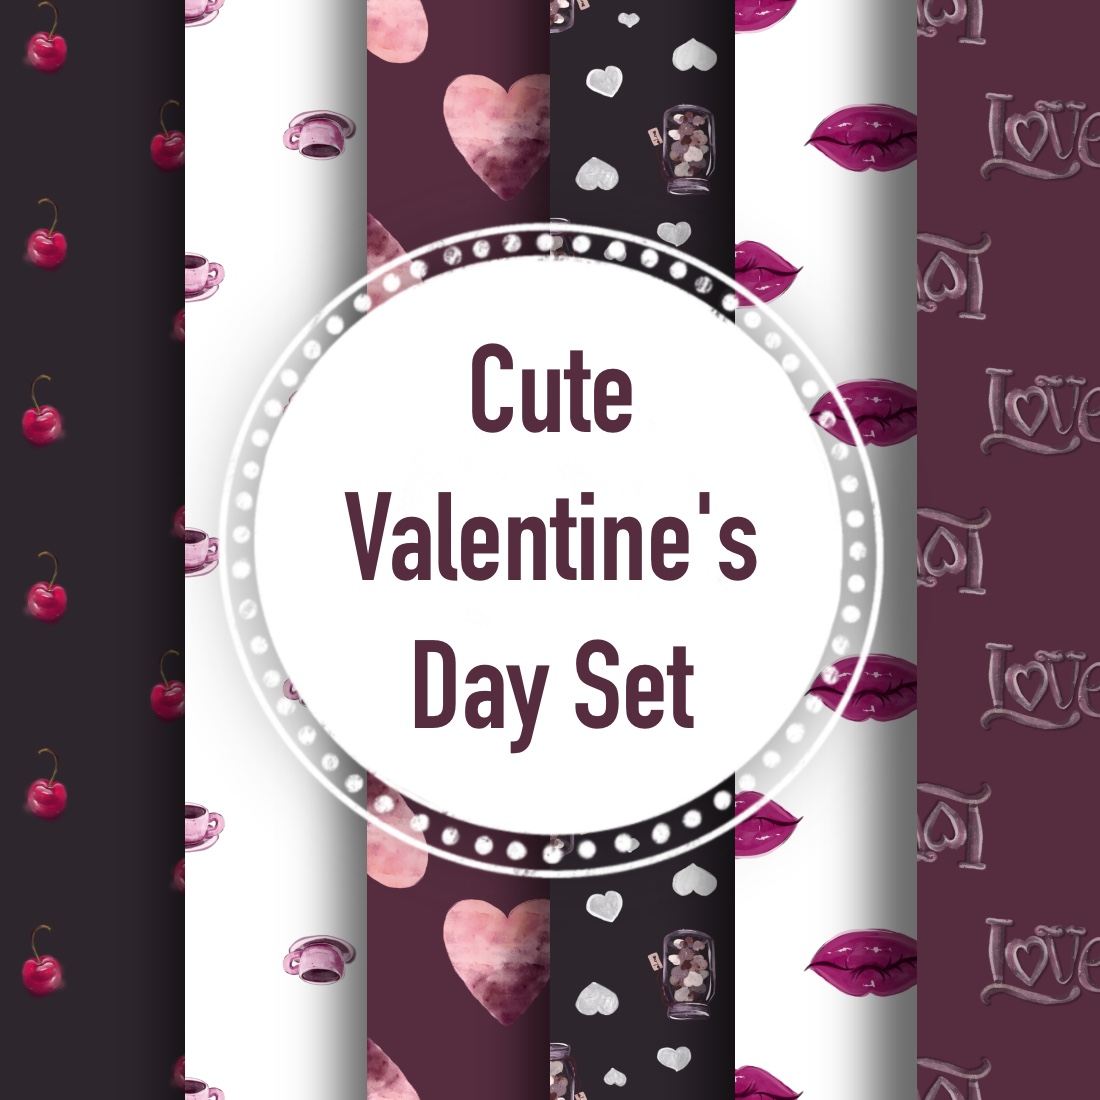 Cute Valentine’s Day Set with seamless pattern, elements cover.